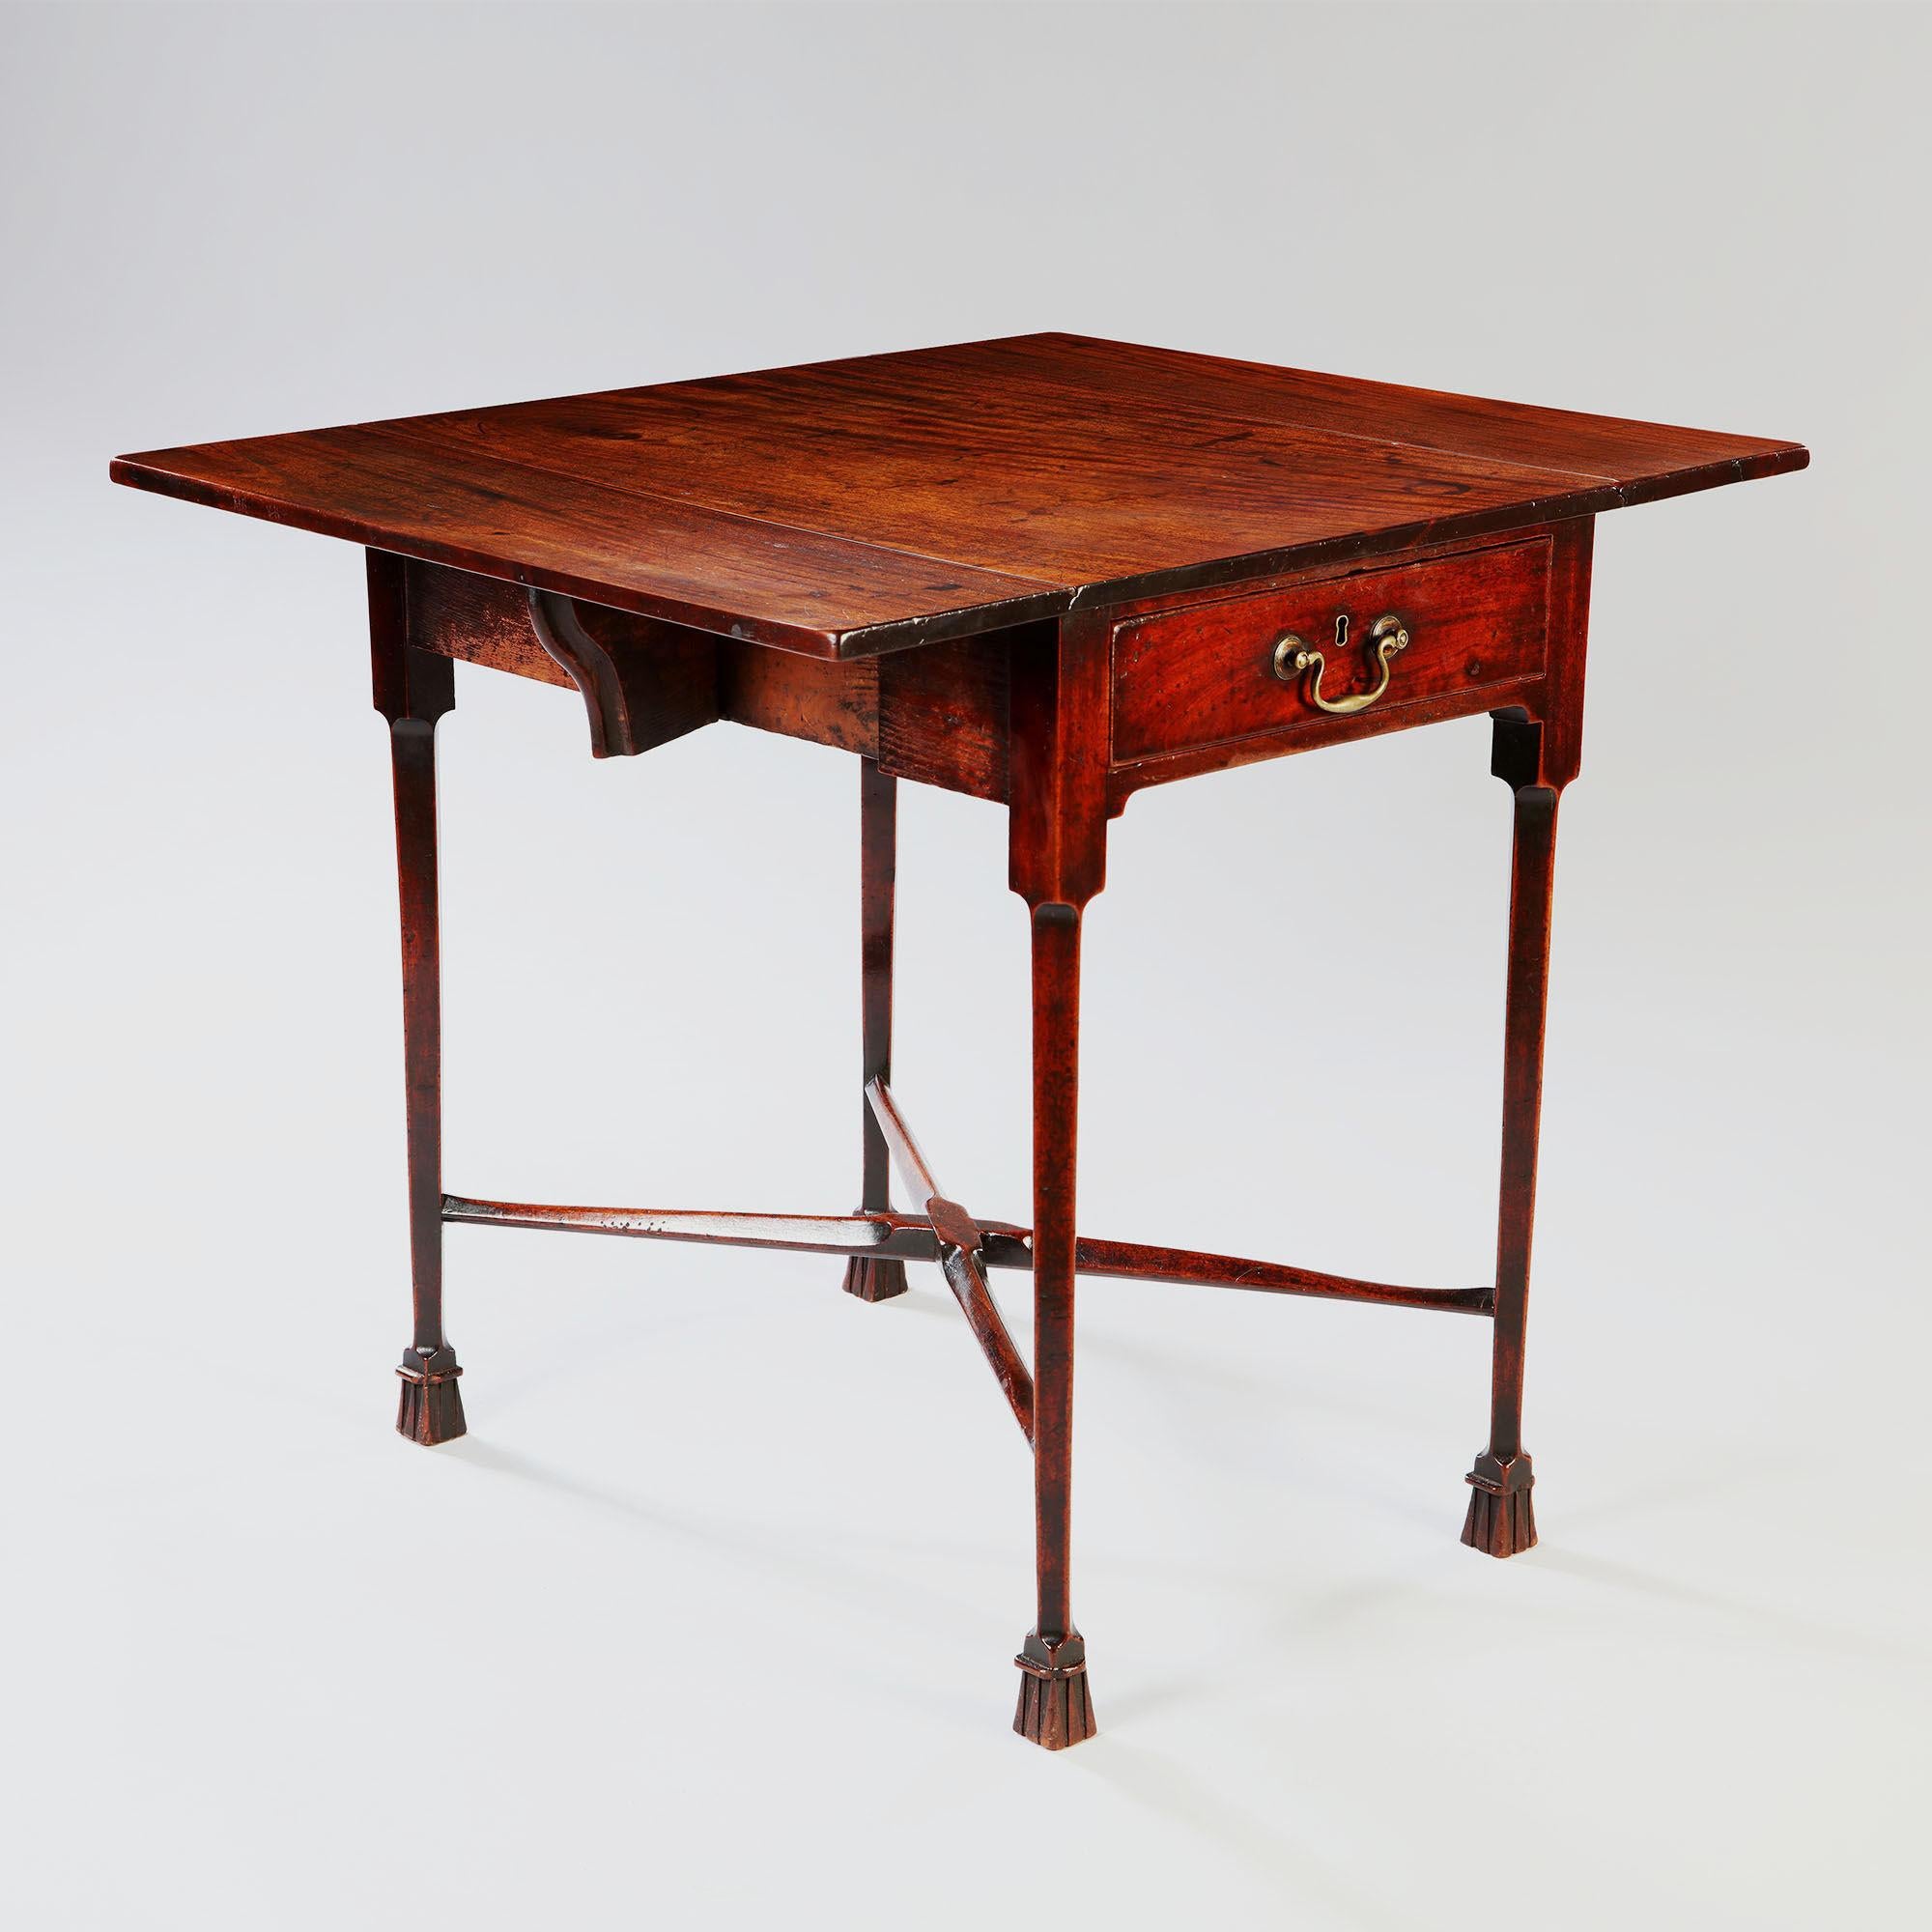 English 18th Century Chippendale Period George III Mahogany Table